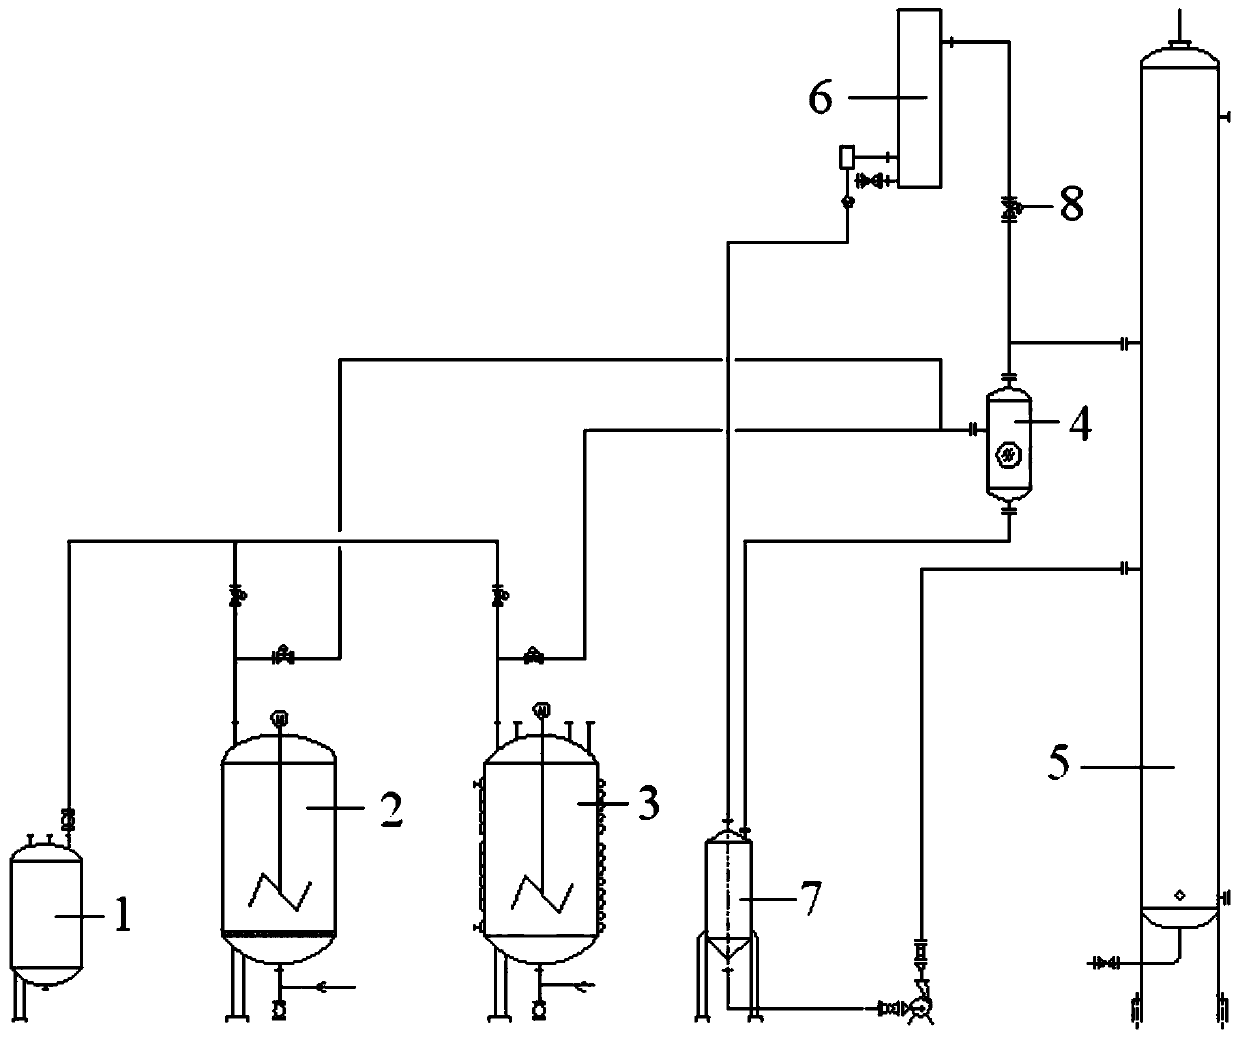 A low-energy recovery system and process for abamectin extraction solvent